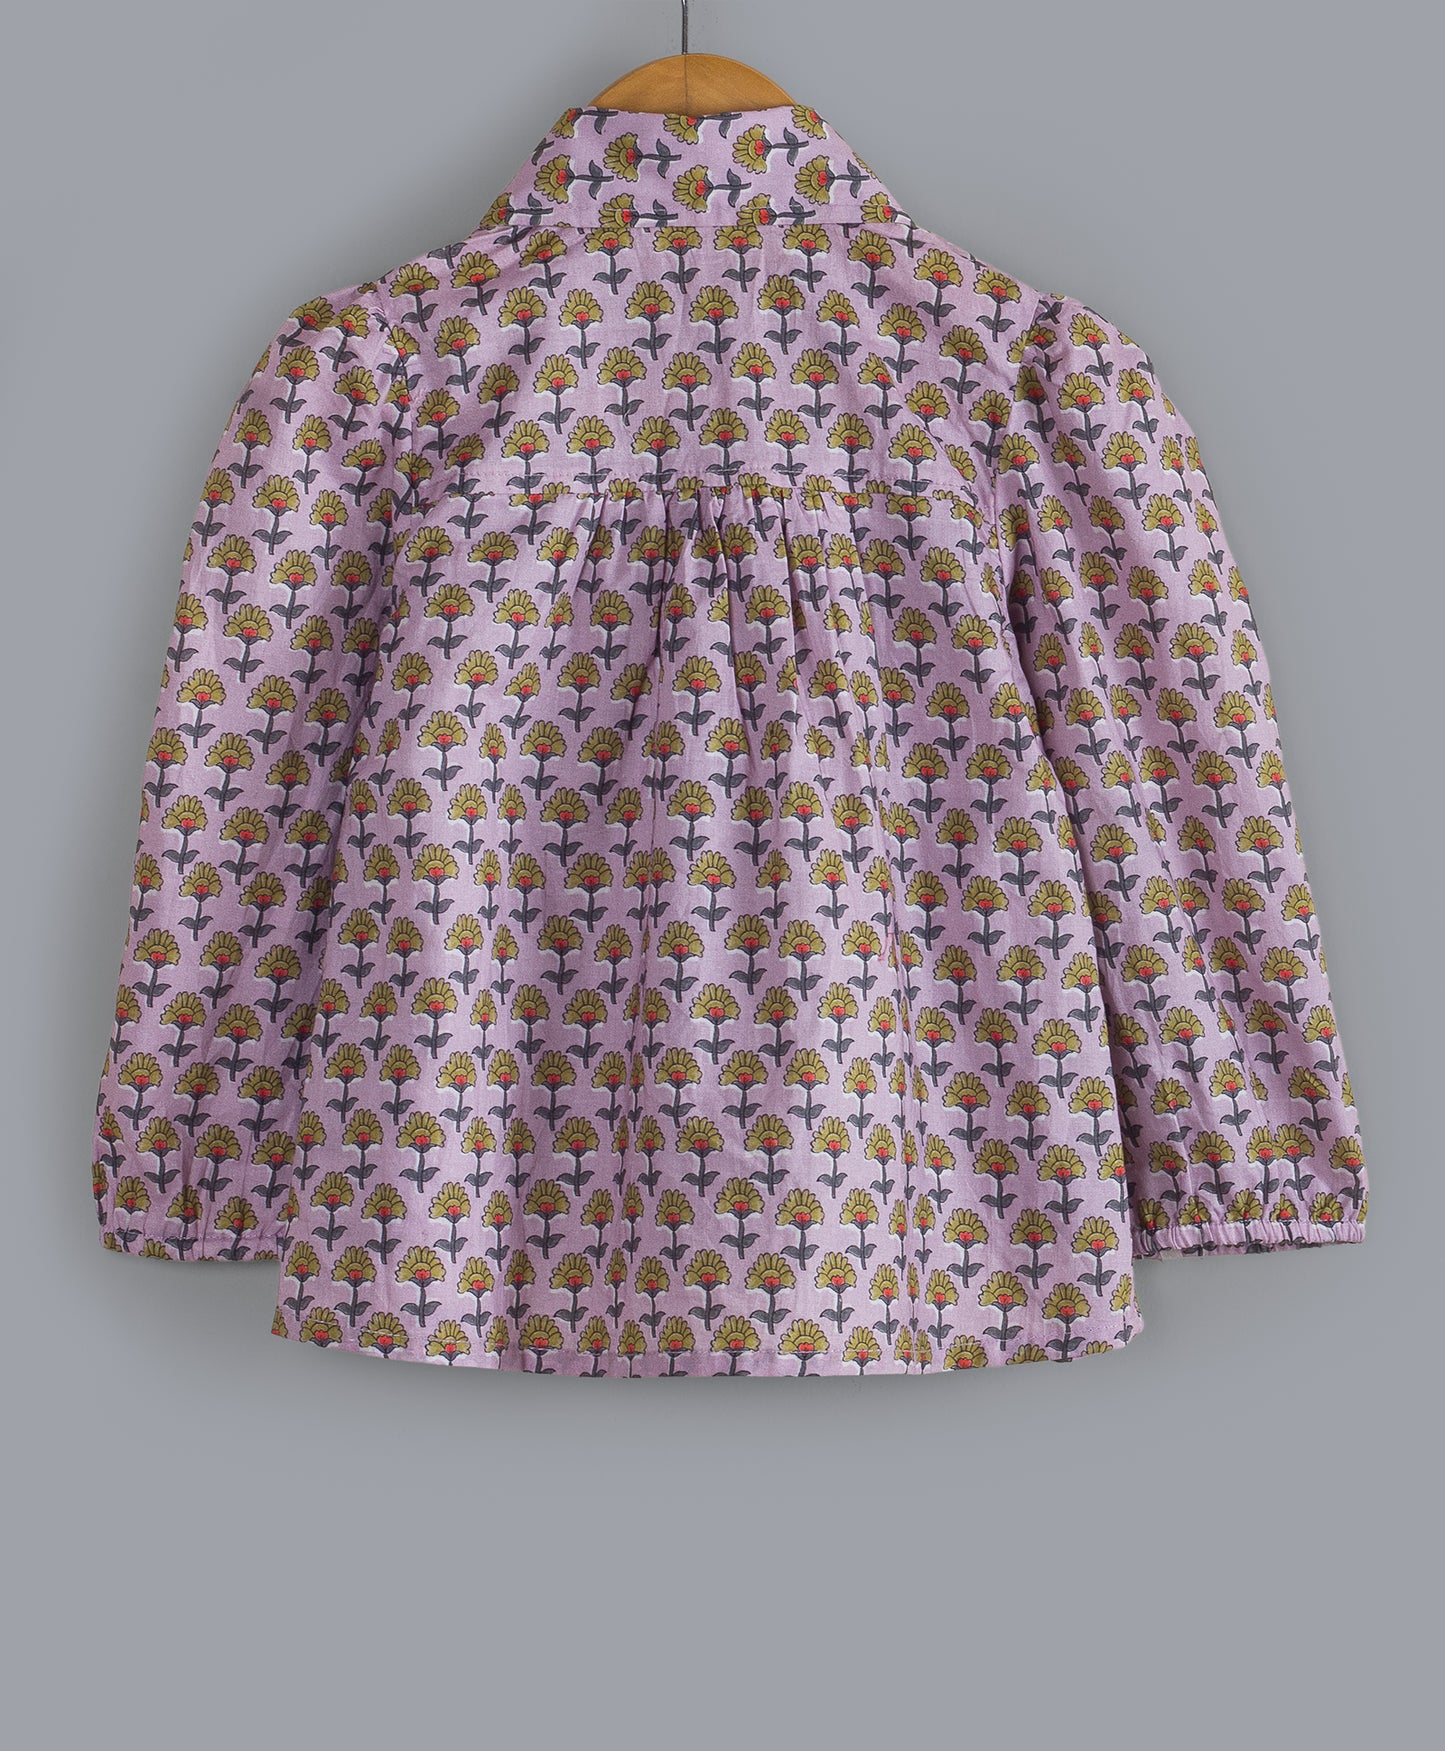 LIGHT PURPLE ALL OVER MOTIF PRINT TOP WITH FRILLS AT FRONT